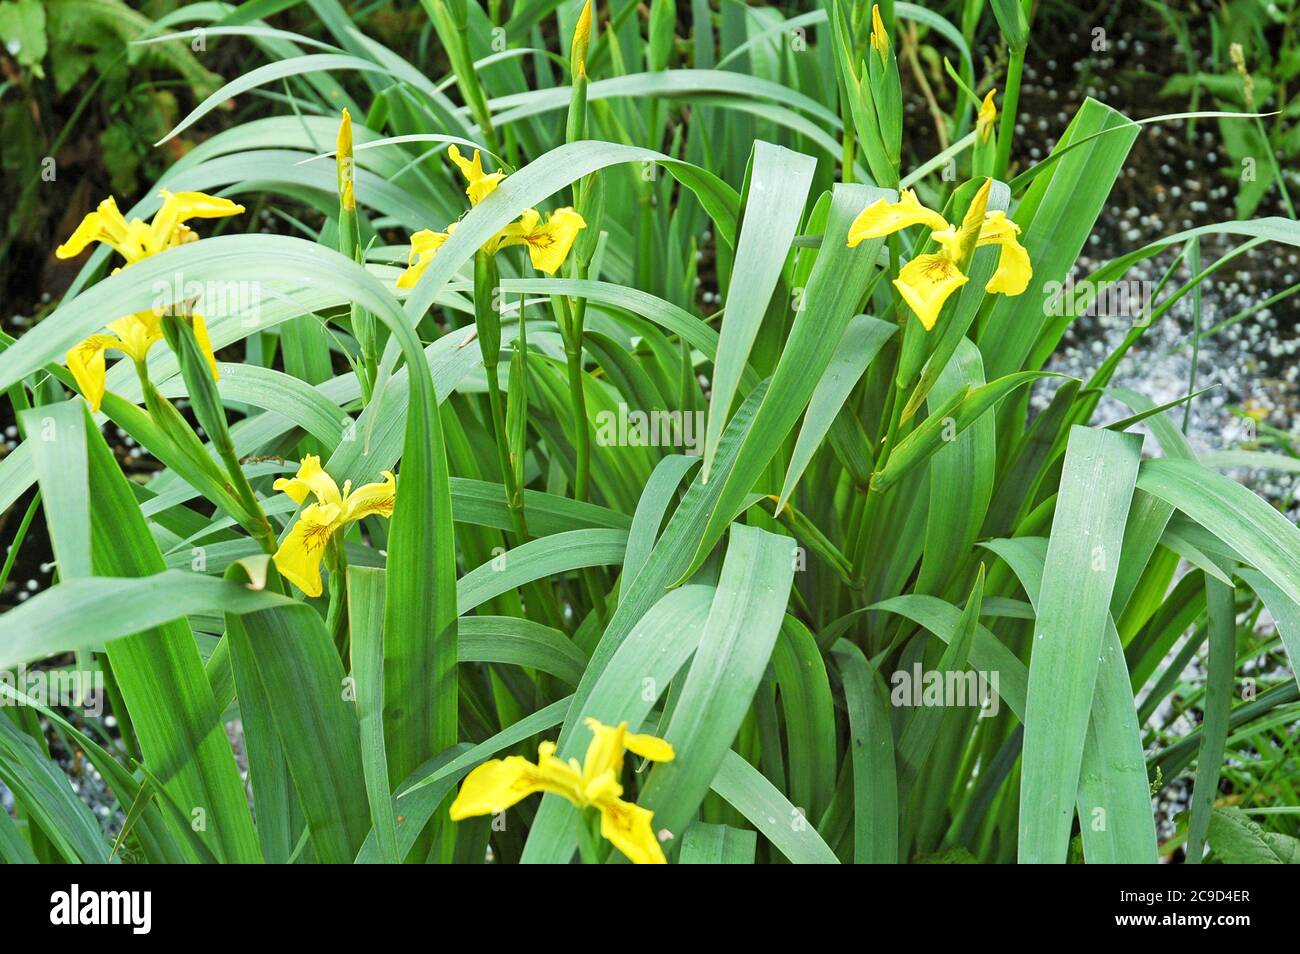 Yellow flag irises (Iris pseudacorus) growing in drainage ditch.  25th May 2006.  West Sussex Coastal Plain. Often used as heraldic device. Stock Photo